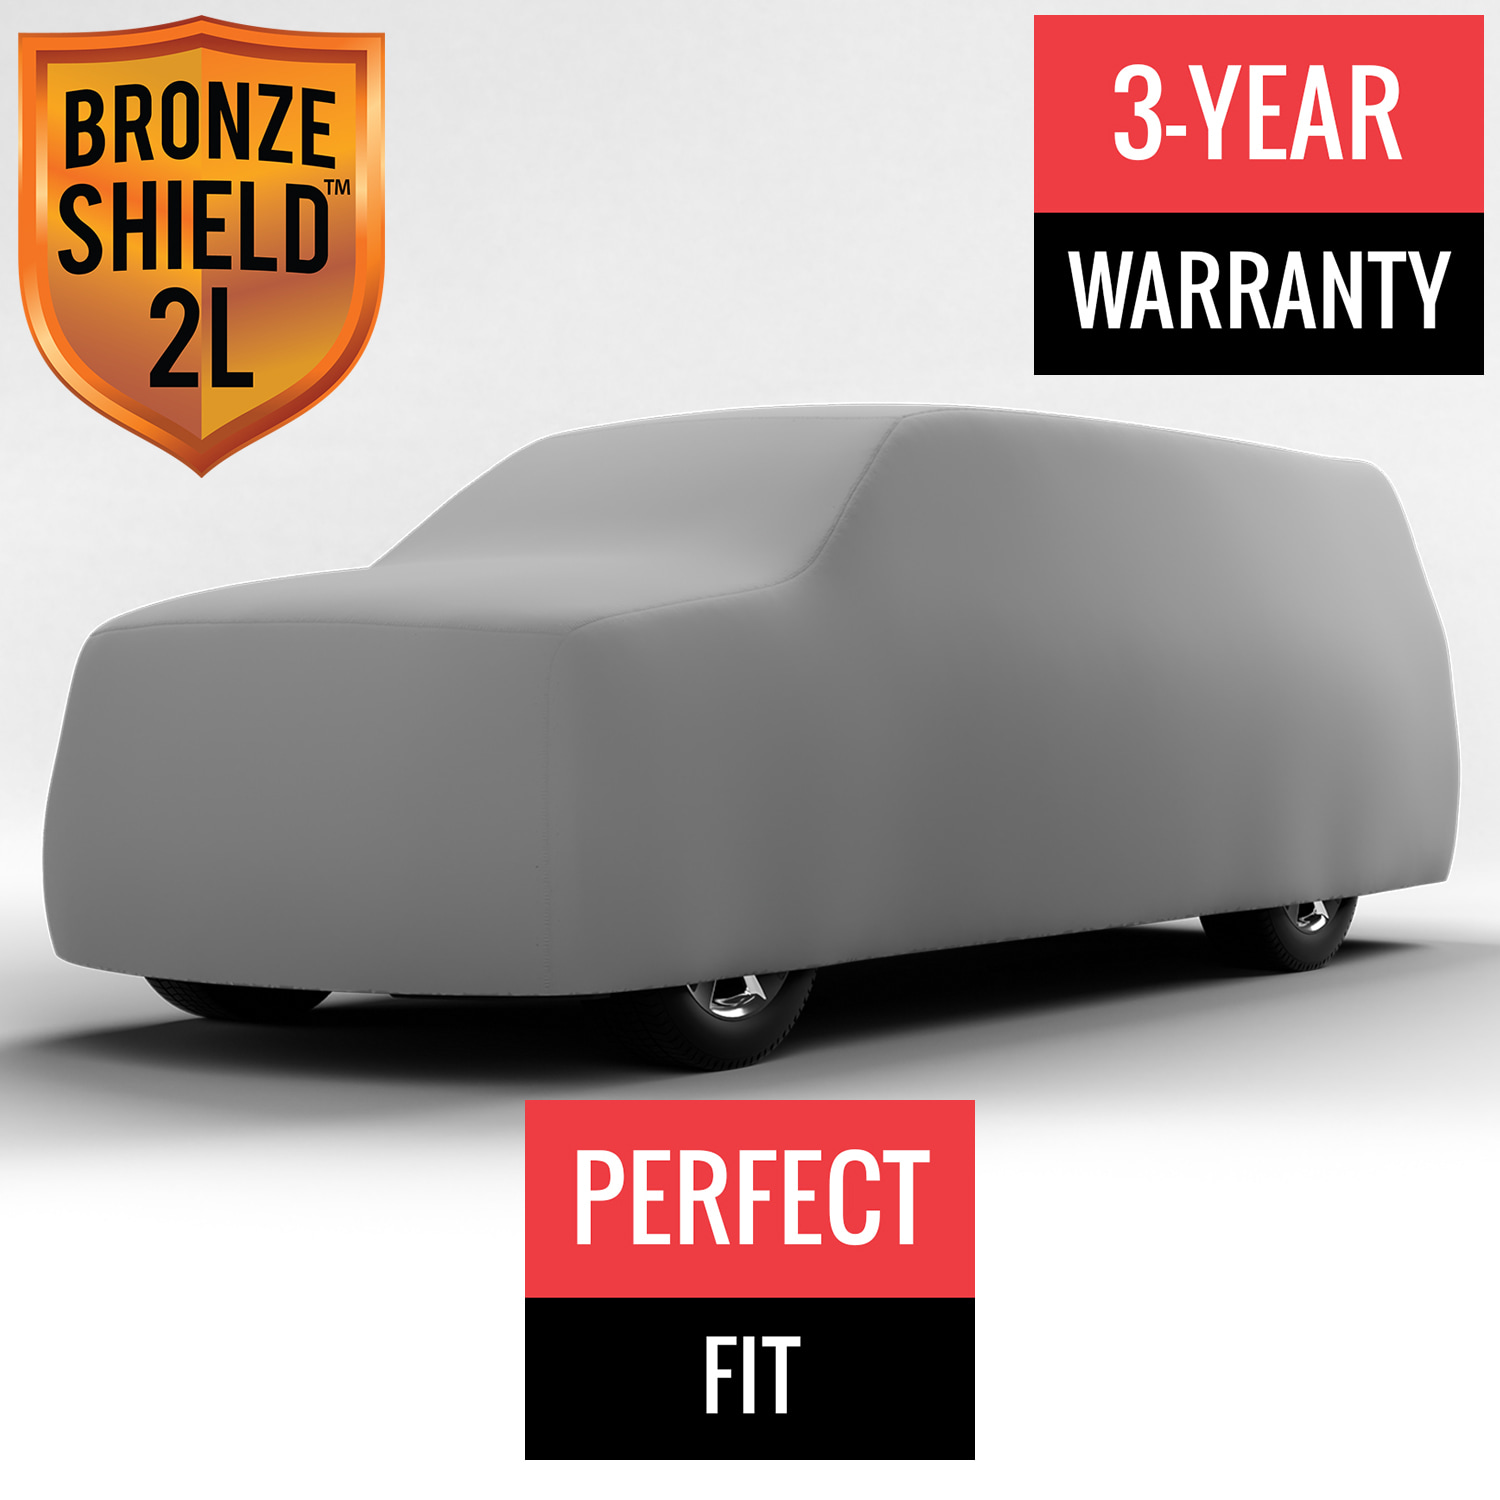 Bronze Shield 2L - Car Cover for GMC Pickup 1967 Extended Cab Pickup 8.0 Feet Bed with Camper Shell